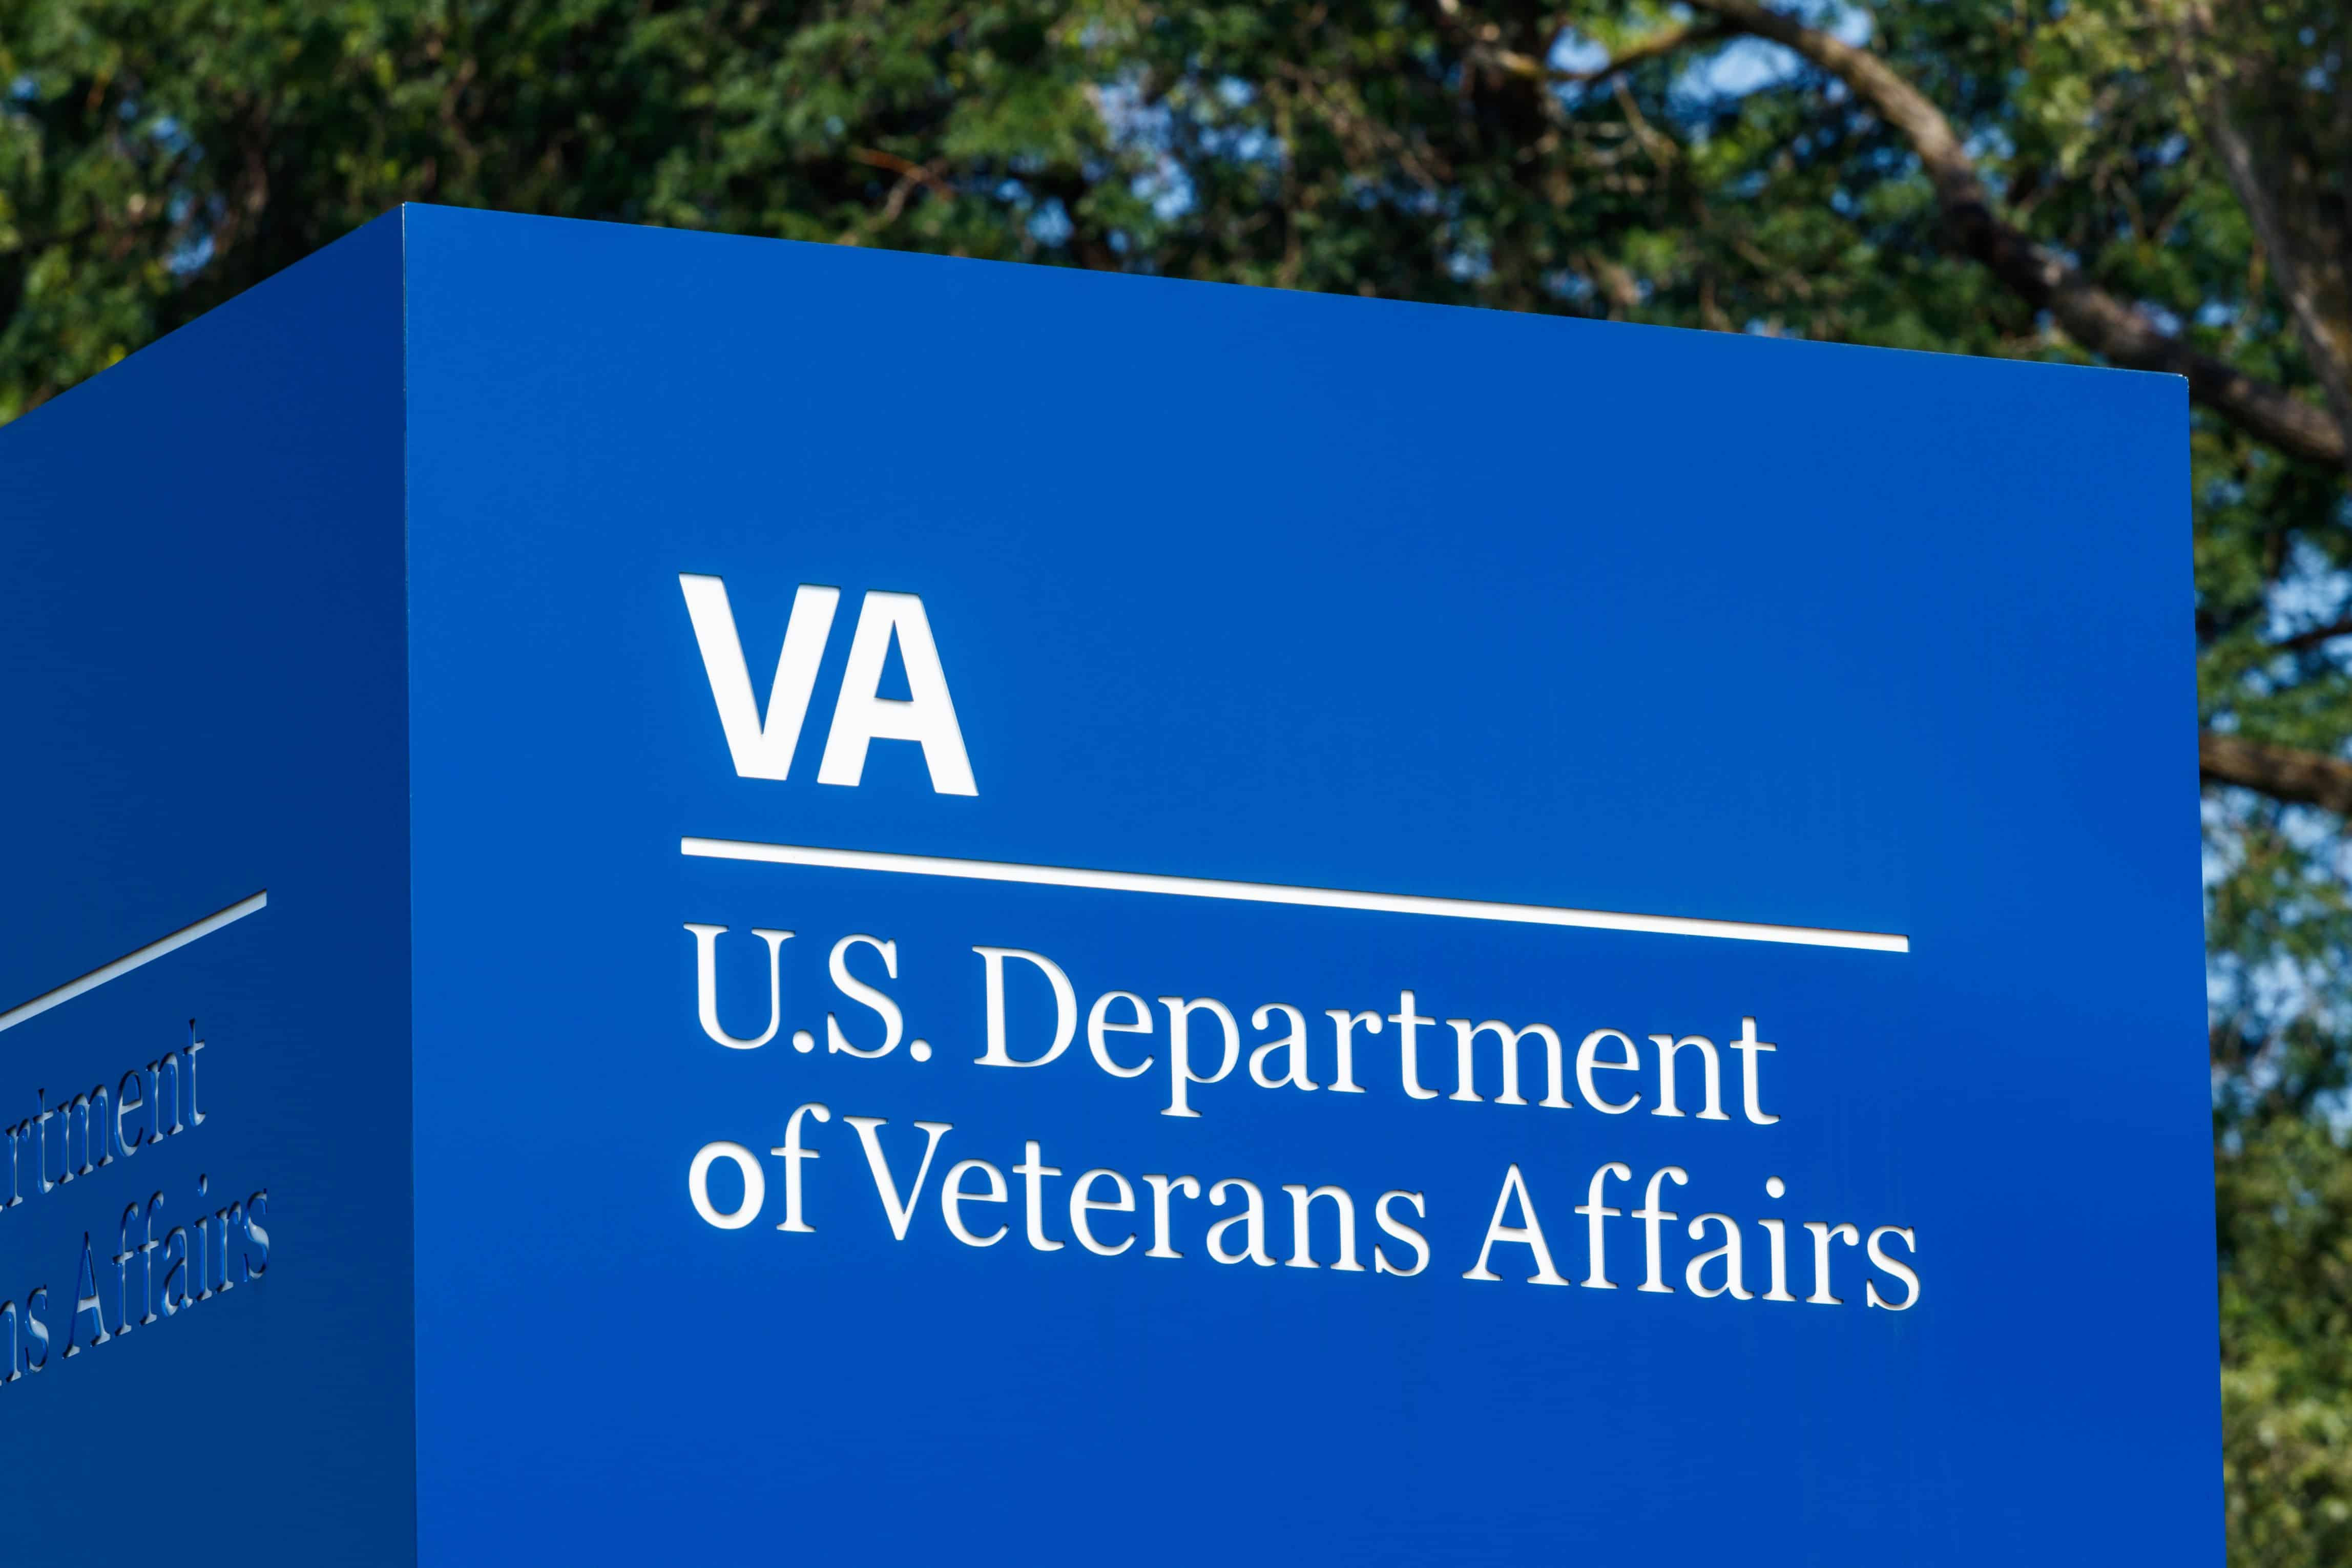 Fort Wayne - Circa August 2018: Signage and logo of the U.S. Department of Veterans Affairs. The VA provides healthcare services to military veterans III